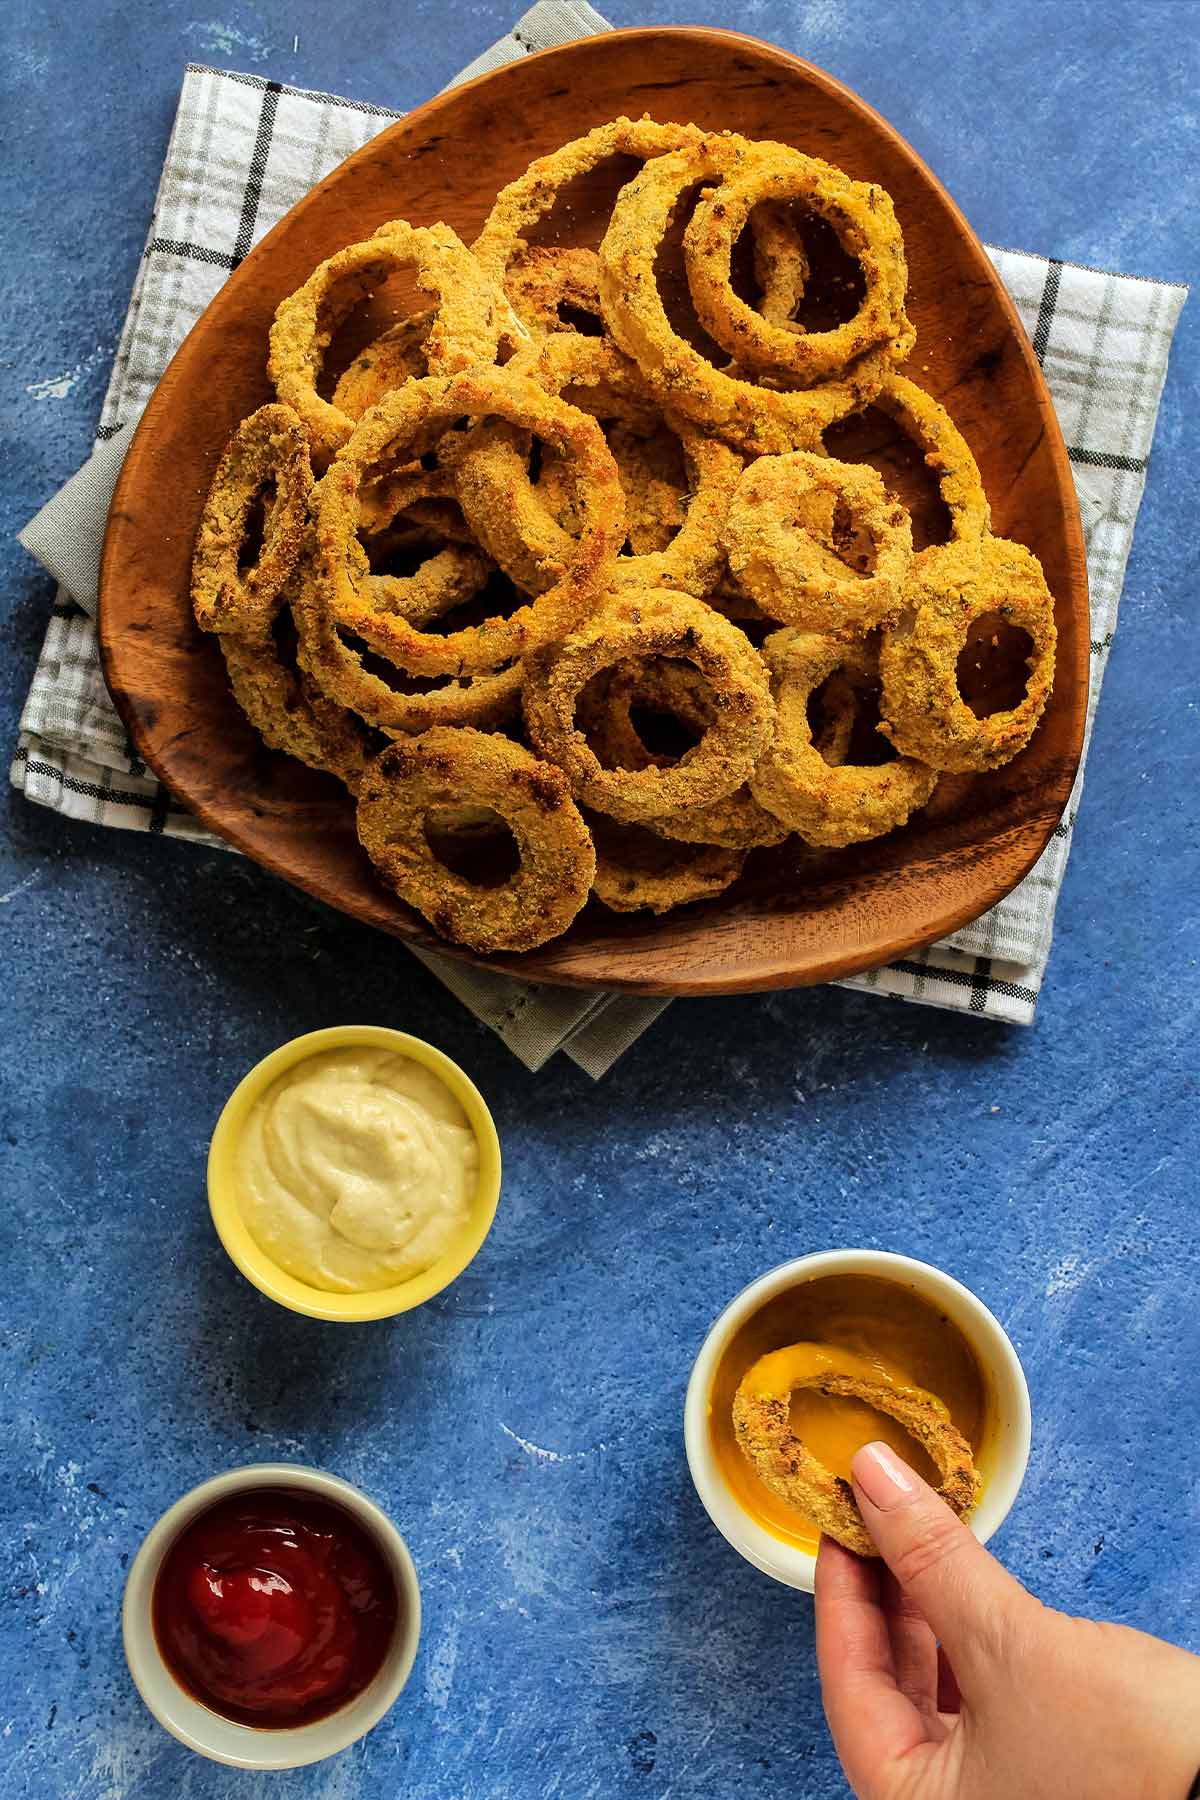 Platter of onion rings with three sauces on the table and a hand dipping one in sauce.